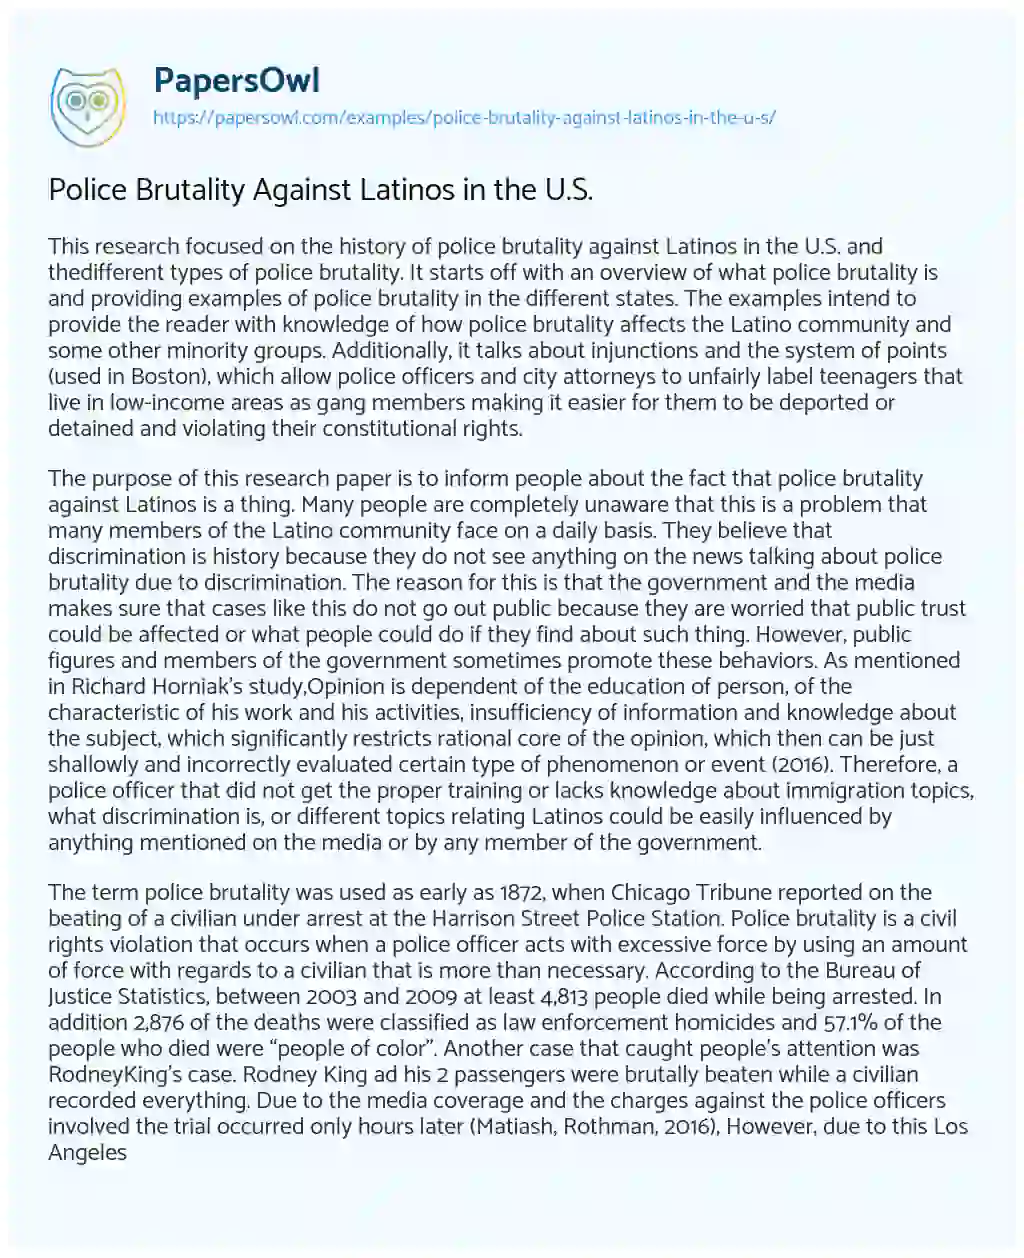 Essay on Police Brutality against Latinos in the U.S.